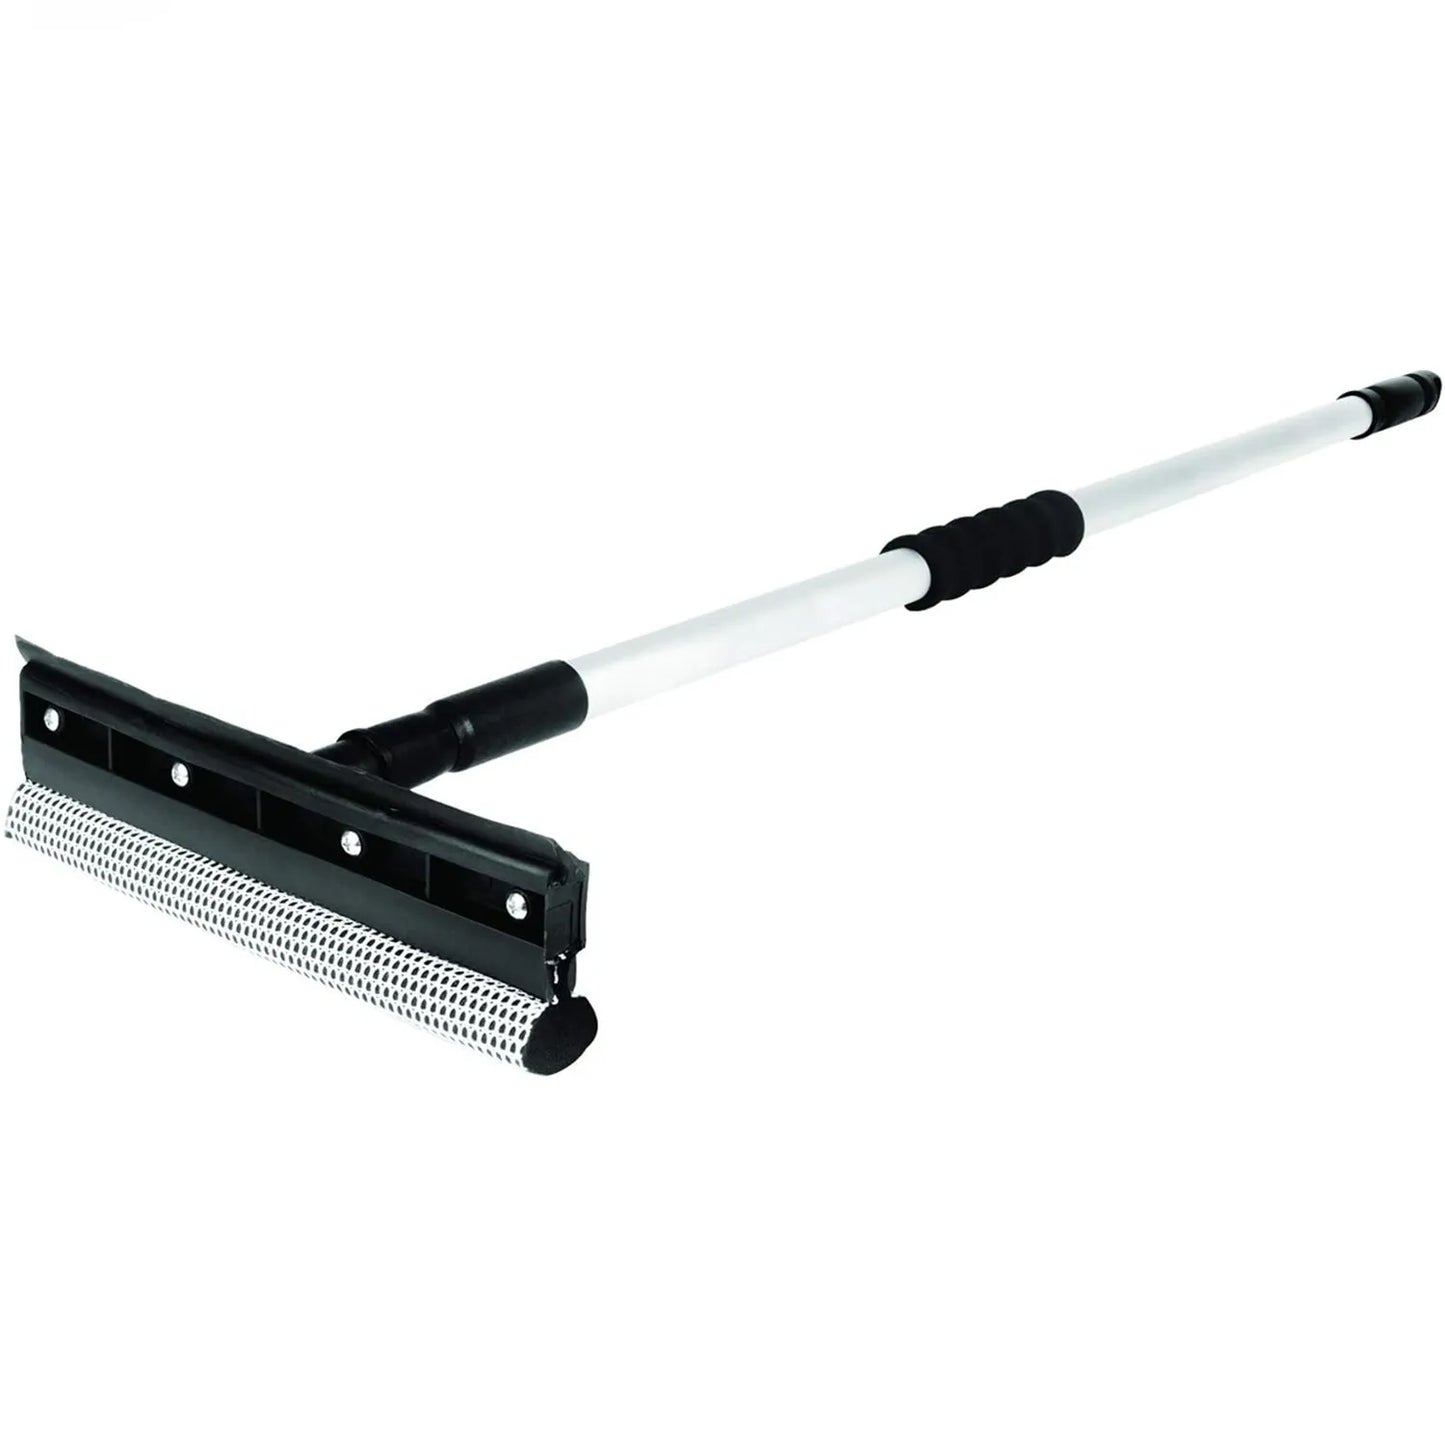 38" Extendable Window Squeegee Cleaner